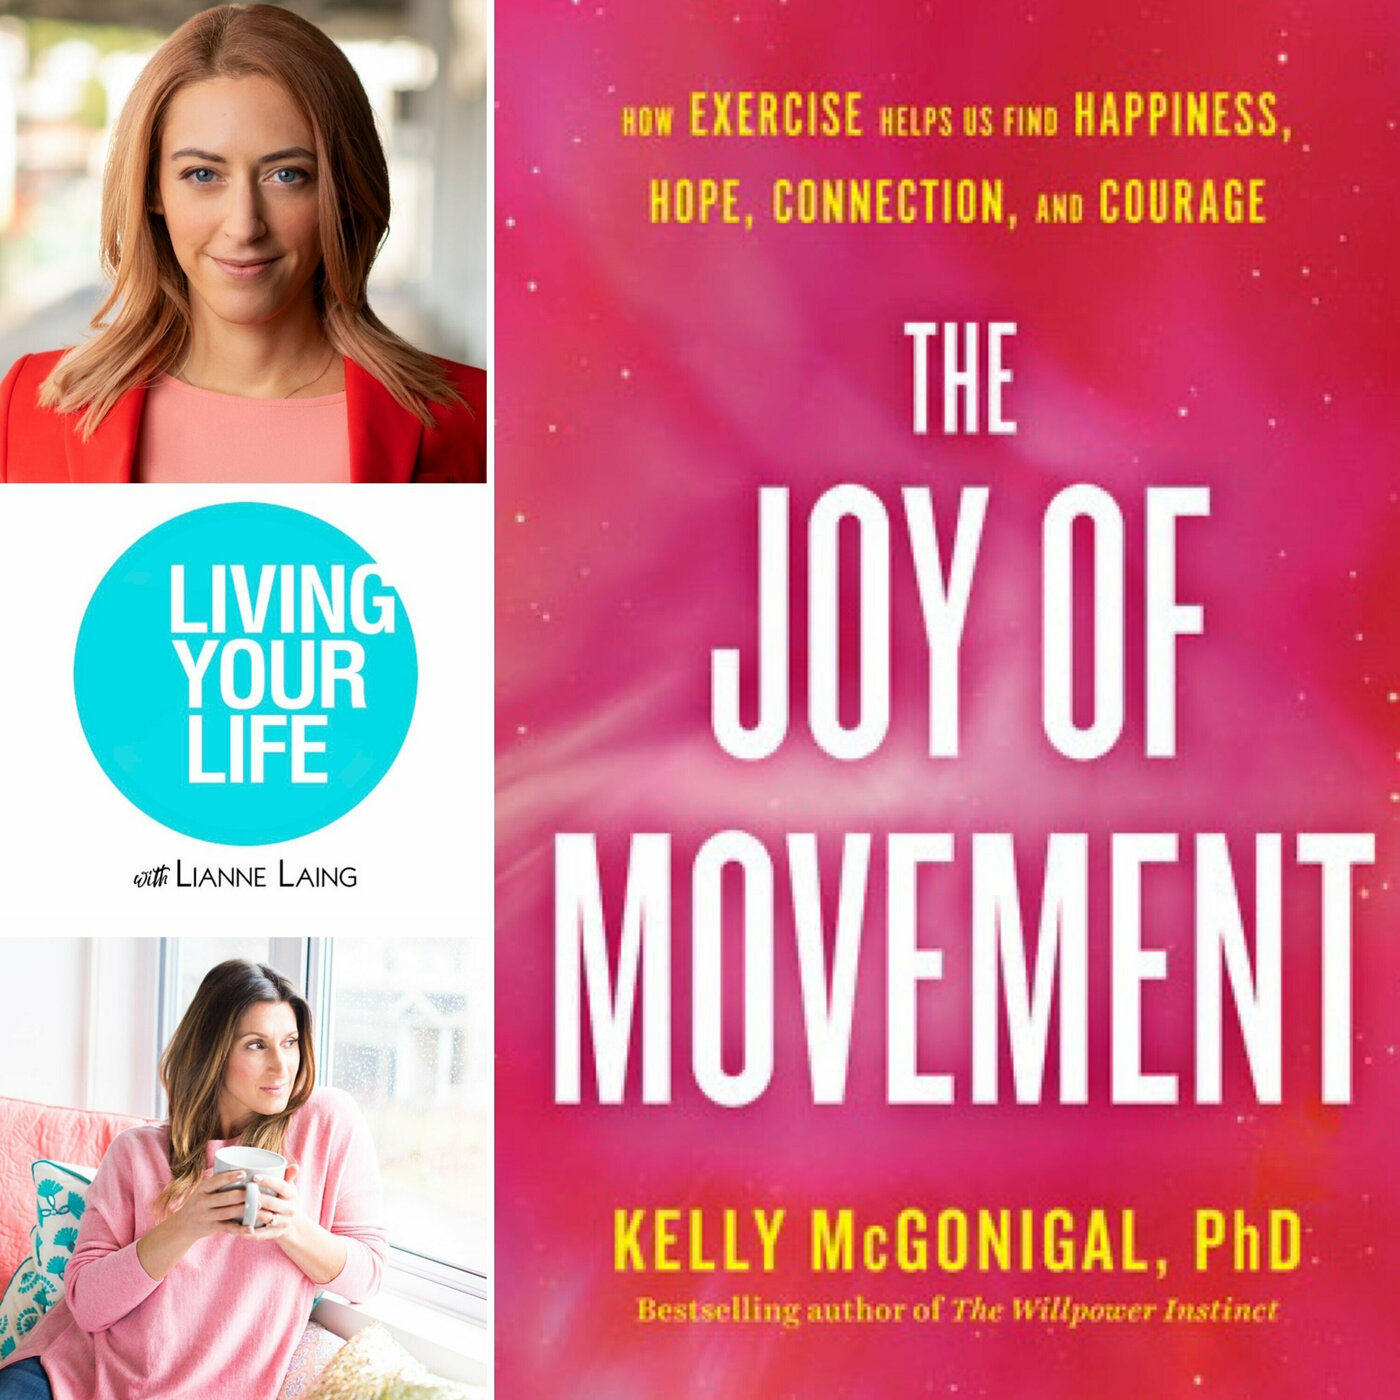 Health Psychologist  Kelly McGonigal On Stress, Movement, Resilience & So Much More